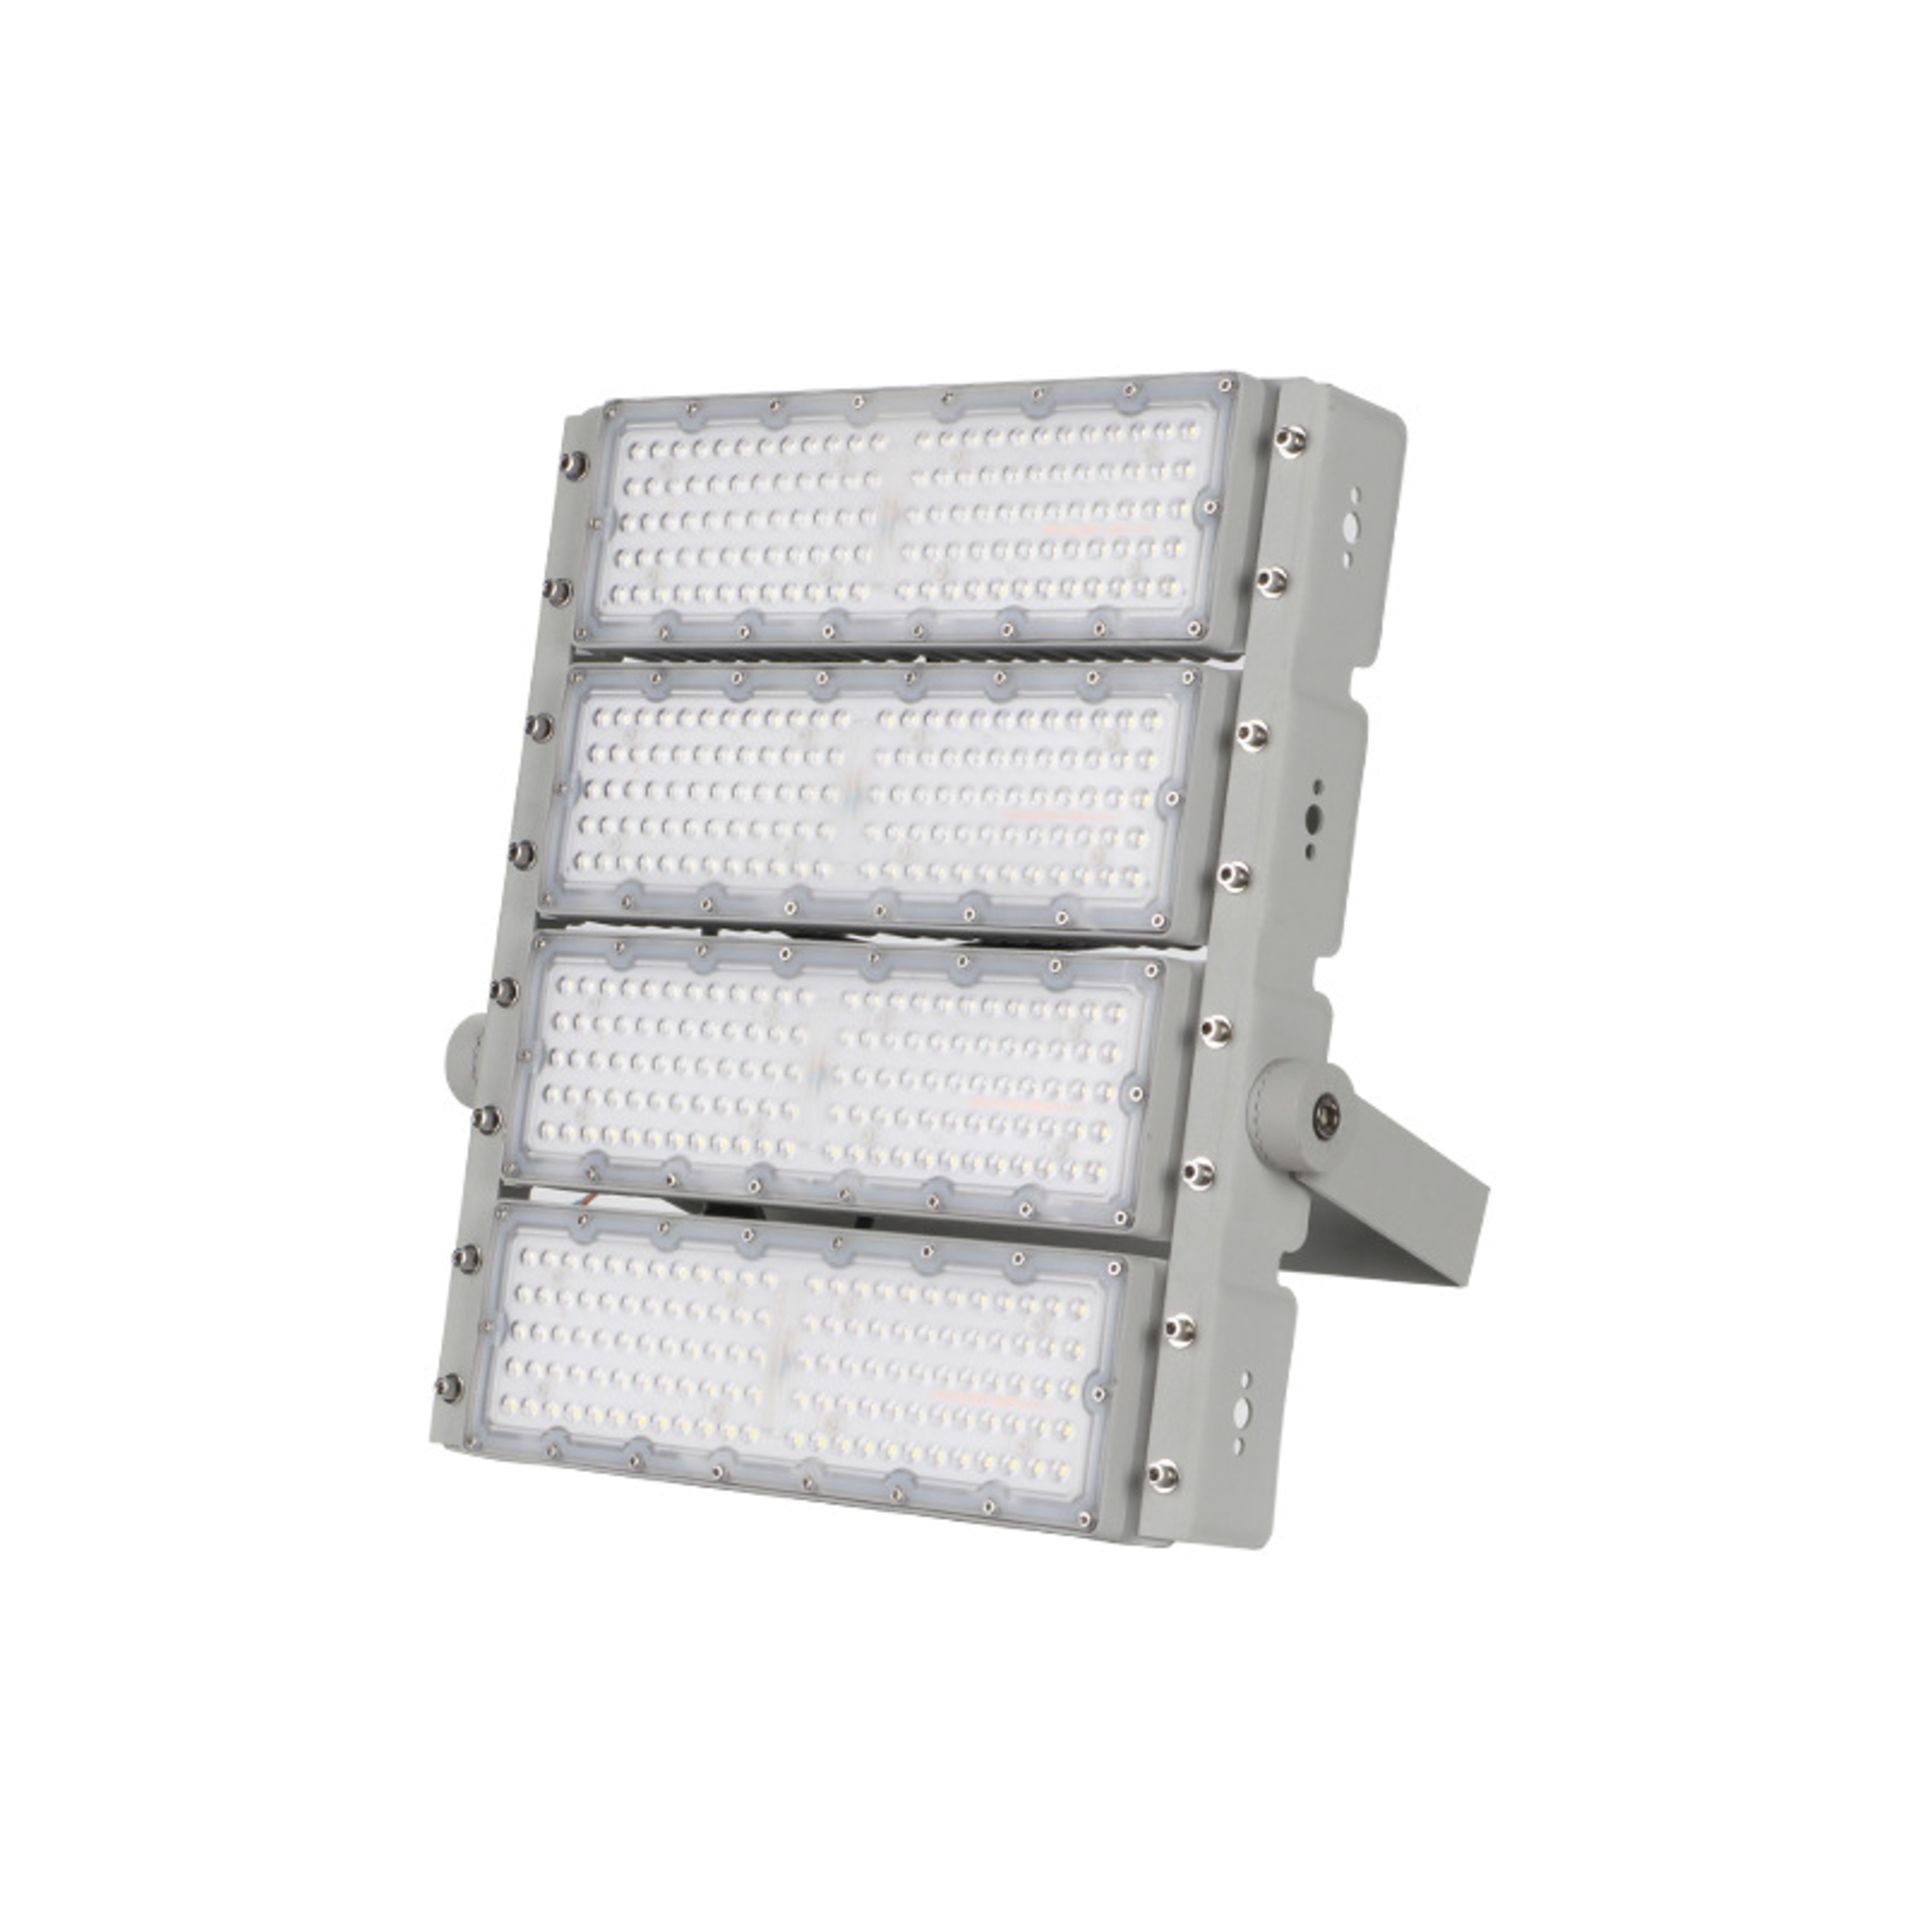 2 x LED400 Watt Flood Light Panel - For Car Parks, Security, Playing fields, Football pitches etc - Image 7 of 8